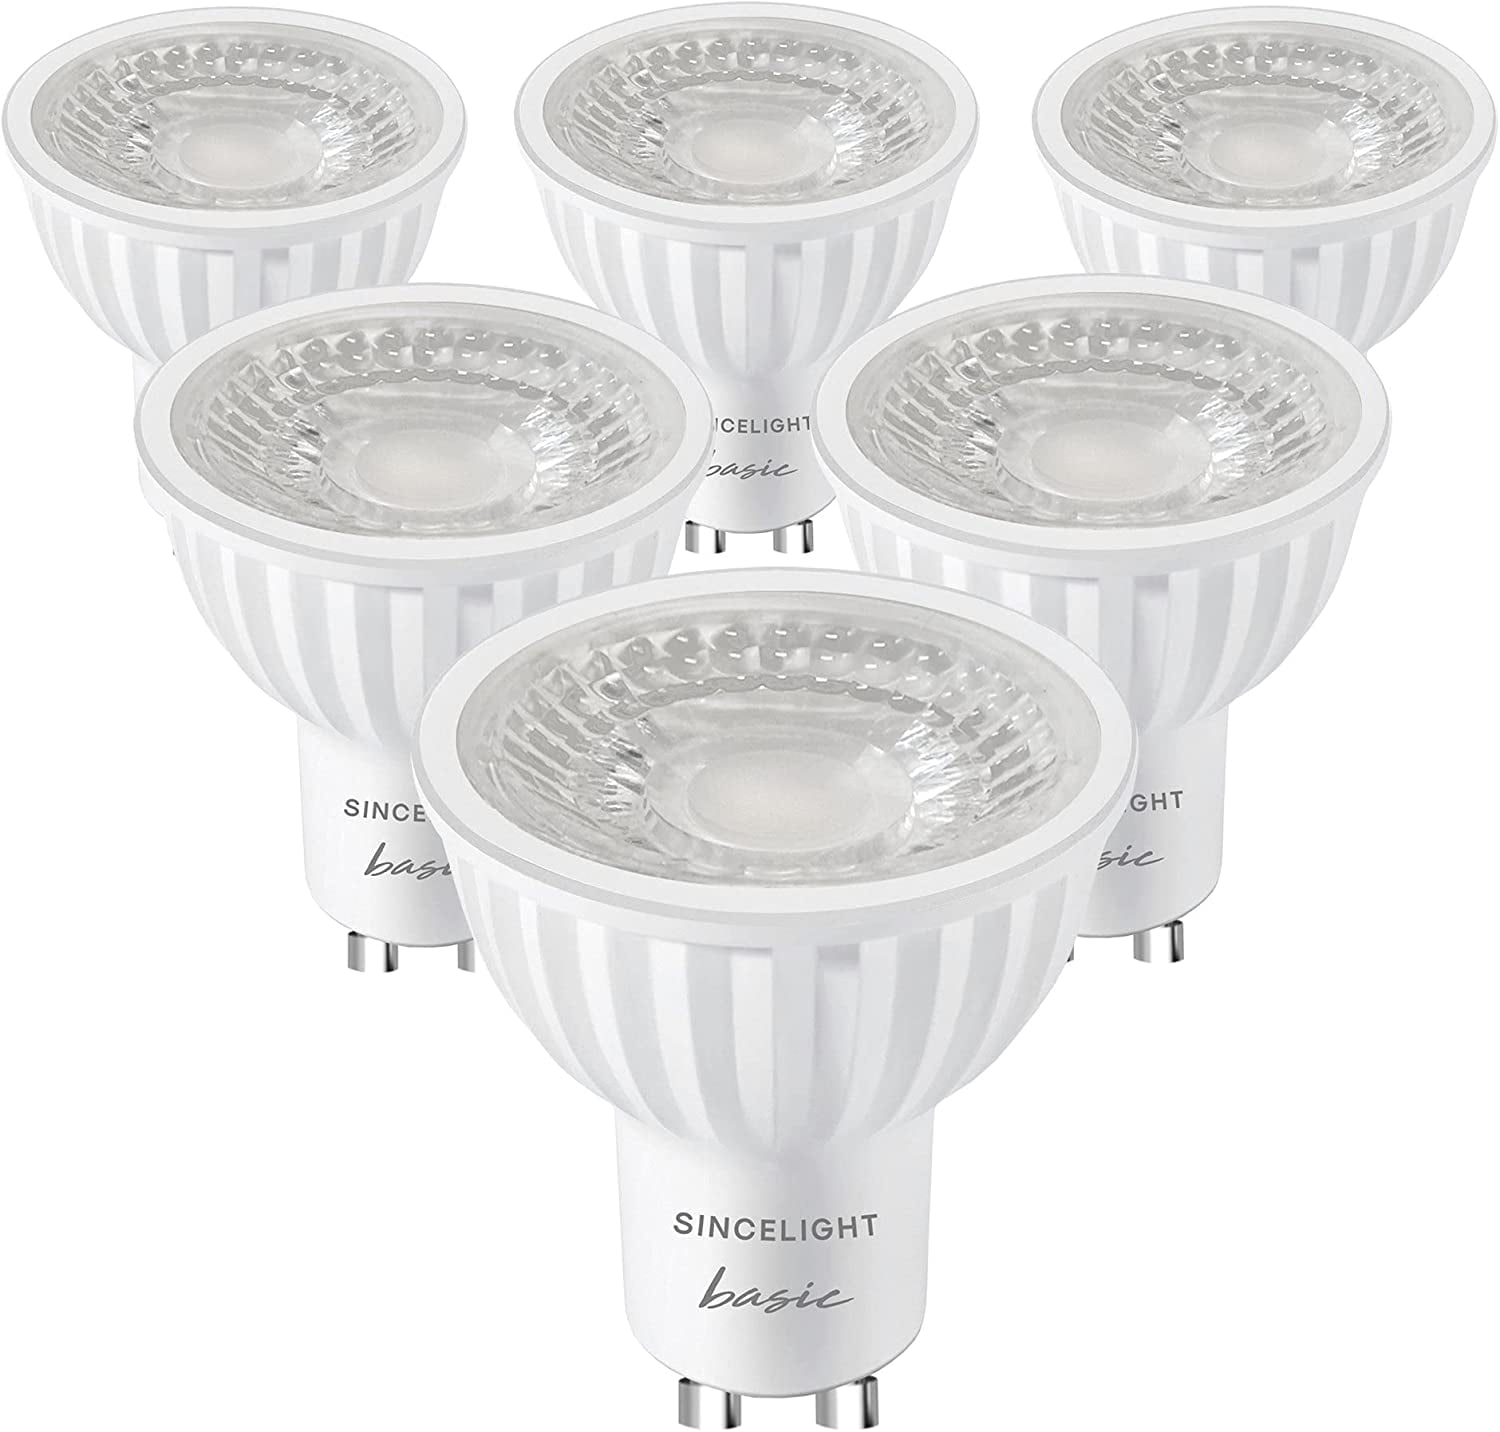 GU10 LED Light 38° Reflector, 6W, RA≈92, Cool White 6000K, Non-Dimmable, 550 Lumens Equivalent to 50W Halogen, Pack of 6 - Walmart.com